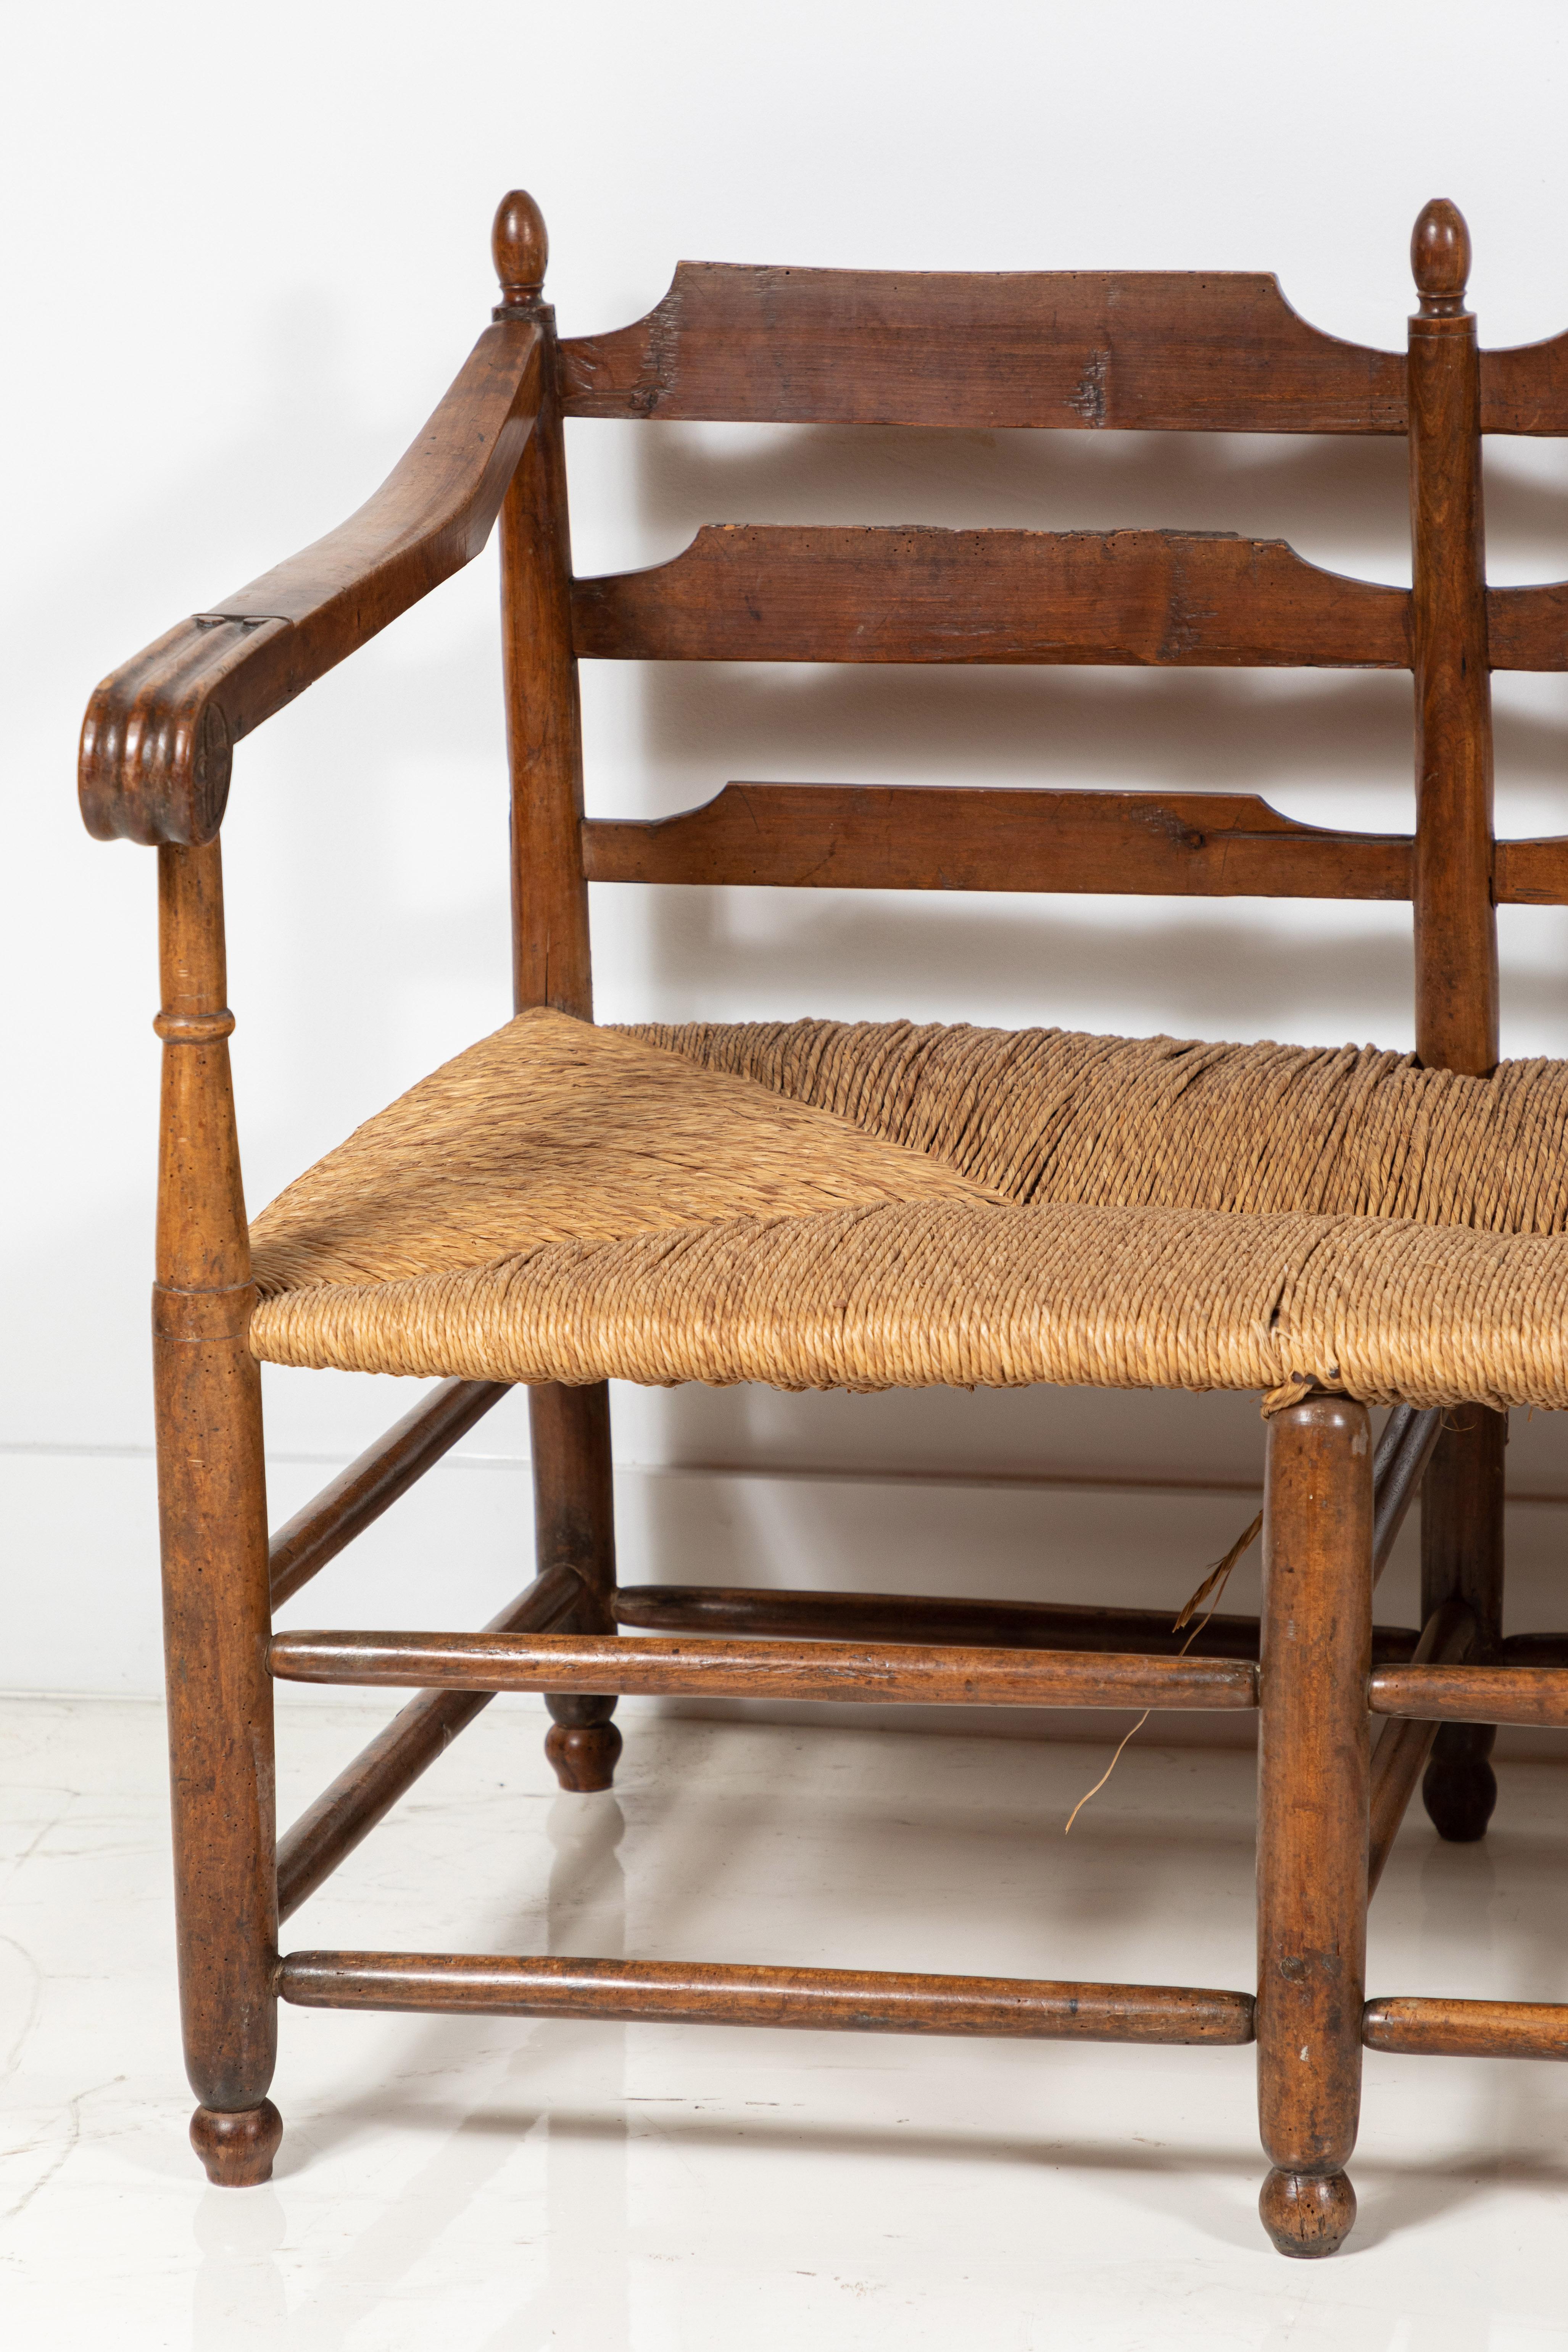 Long French bench with scrolled arms and wooden ladder back details. Original rush is in great condition.